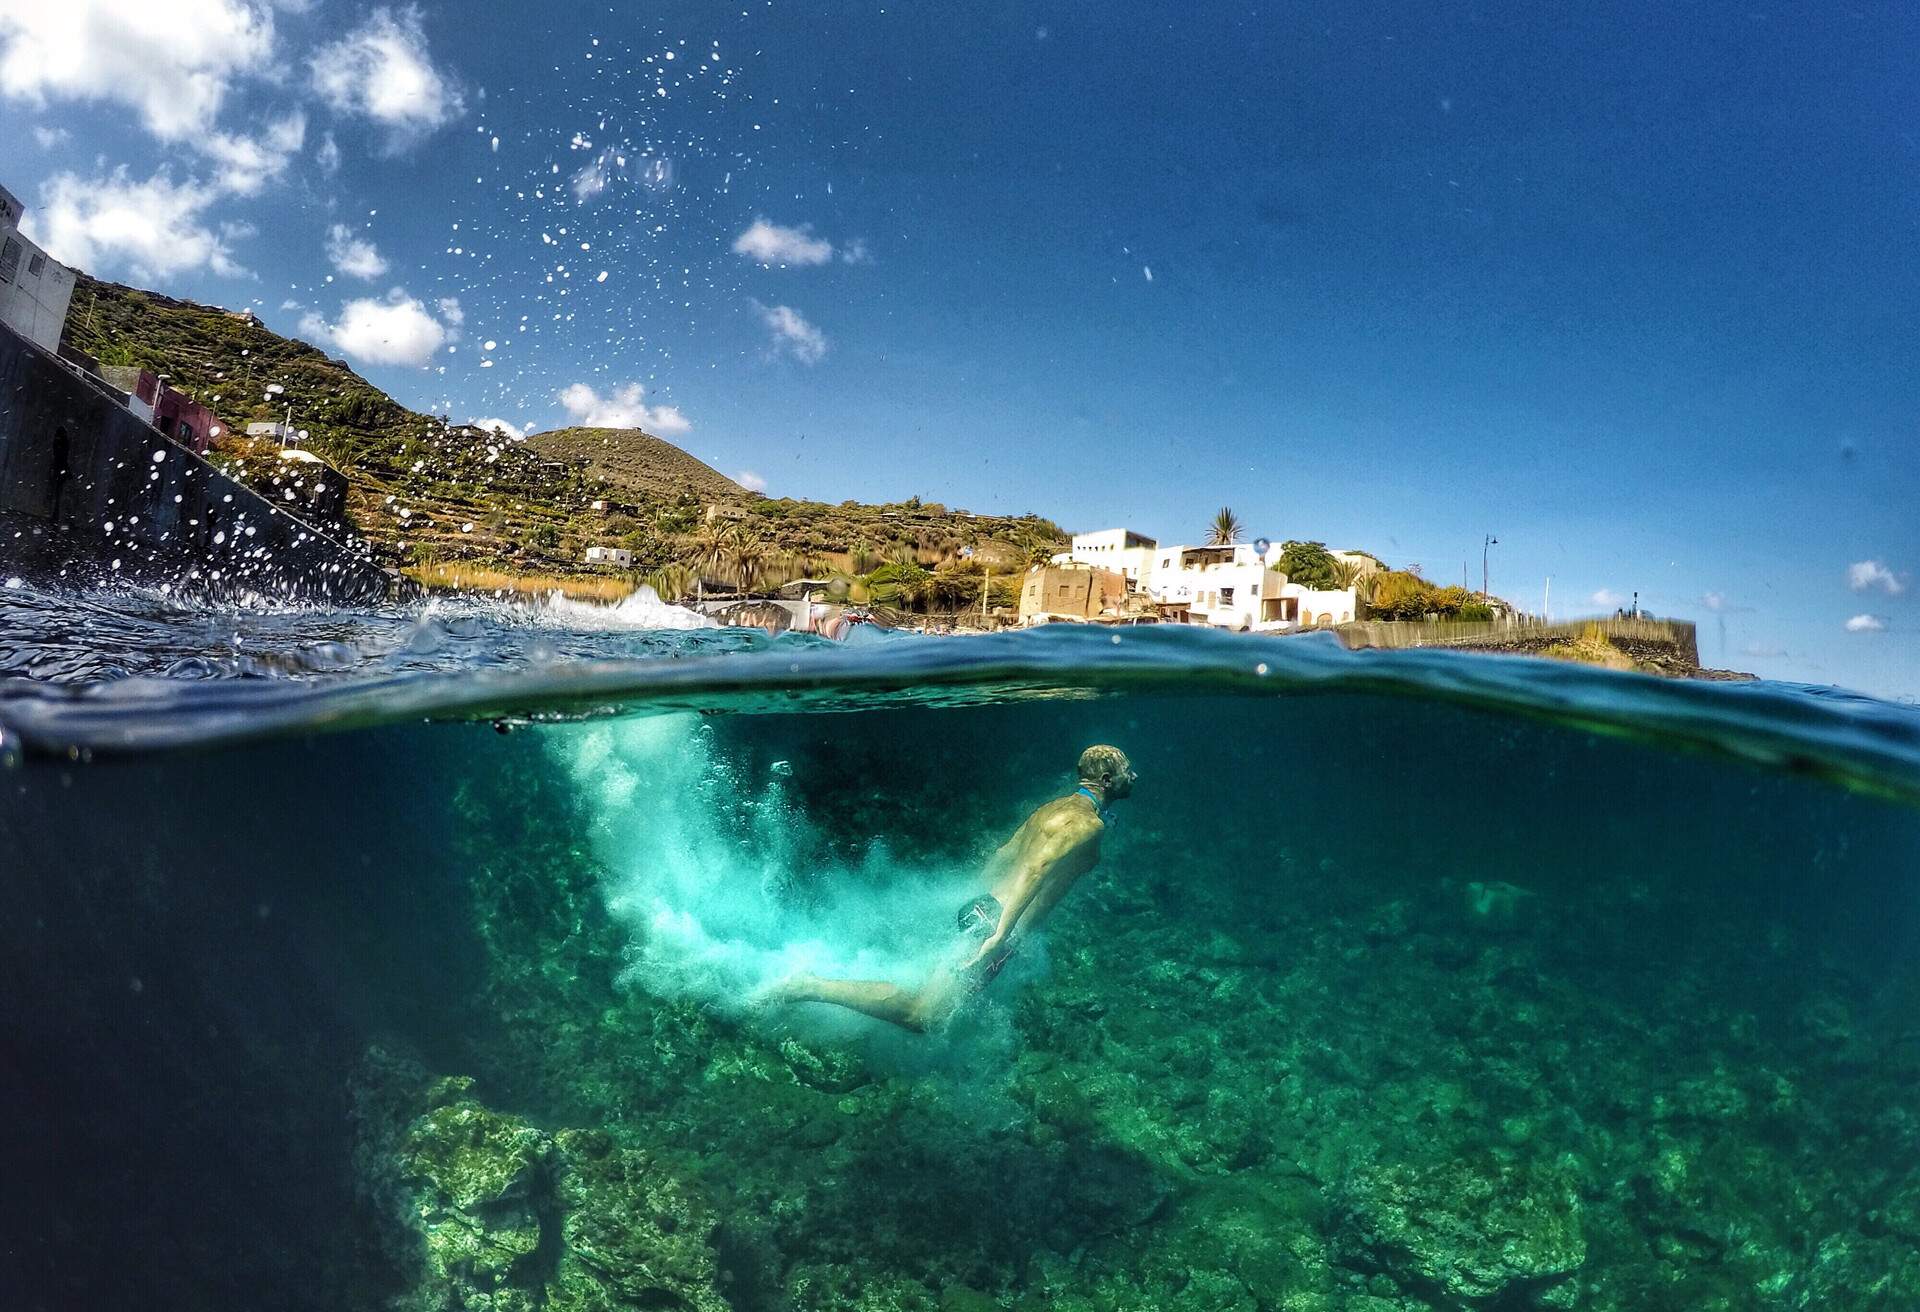 DEST_ITALY_SICILY_PANTELLERIA_THEME_DIVING_SNORKELLING_GettyImages-899506172